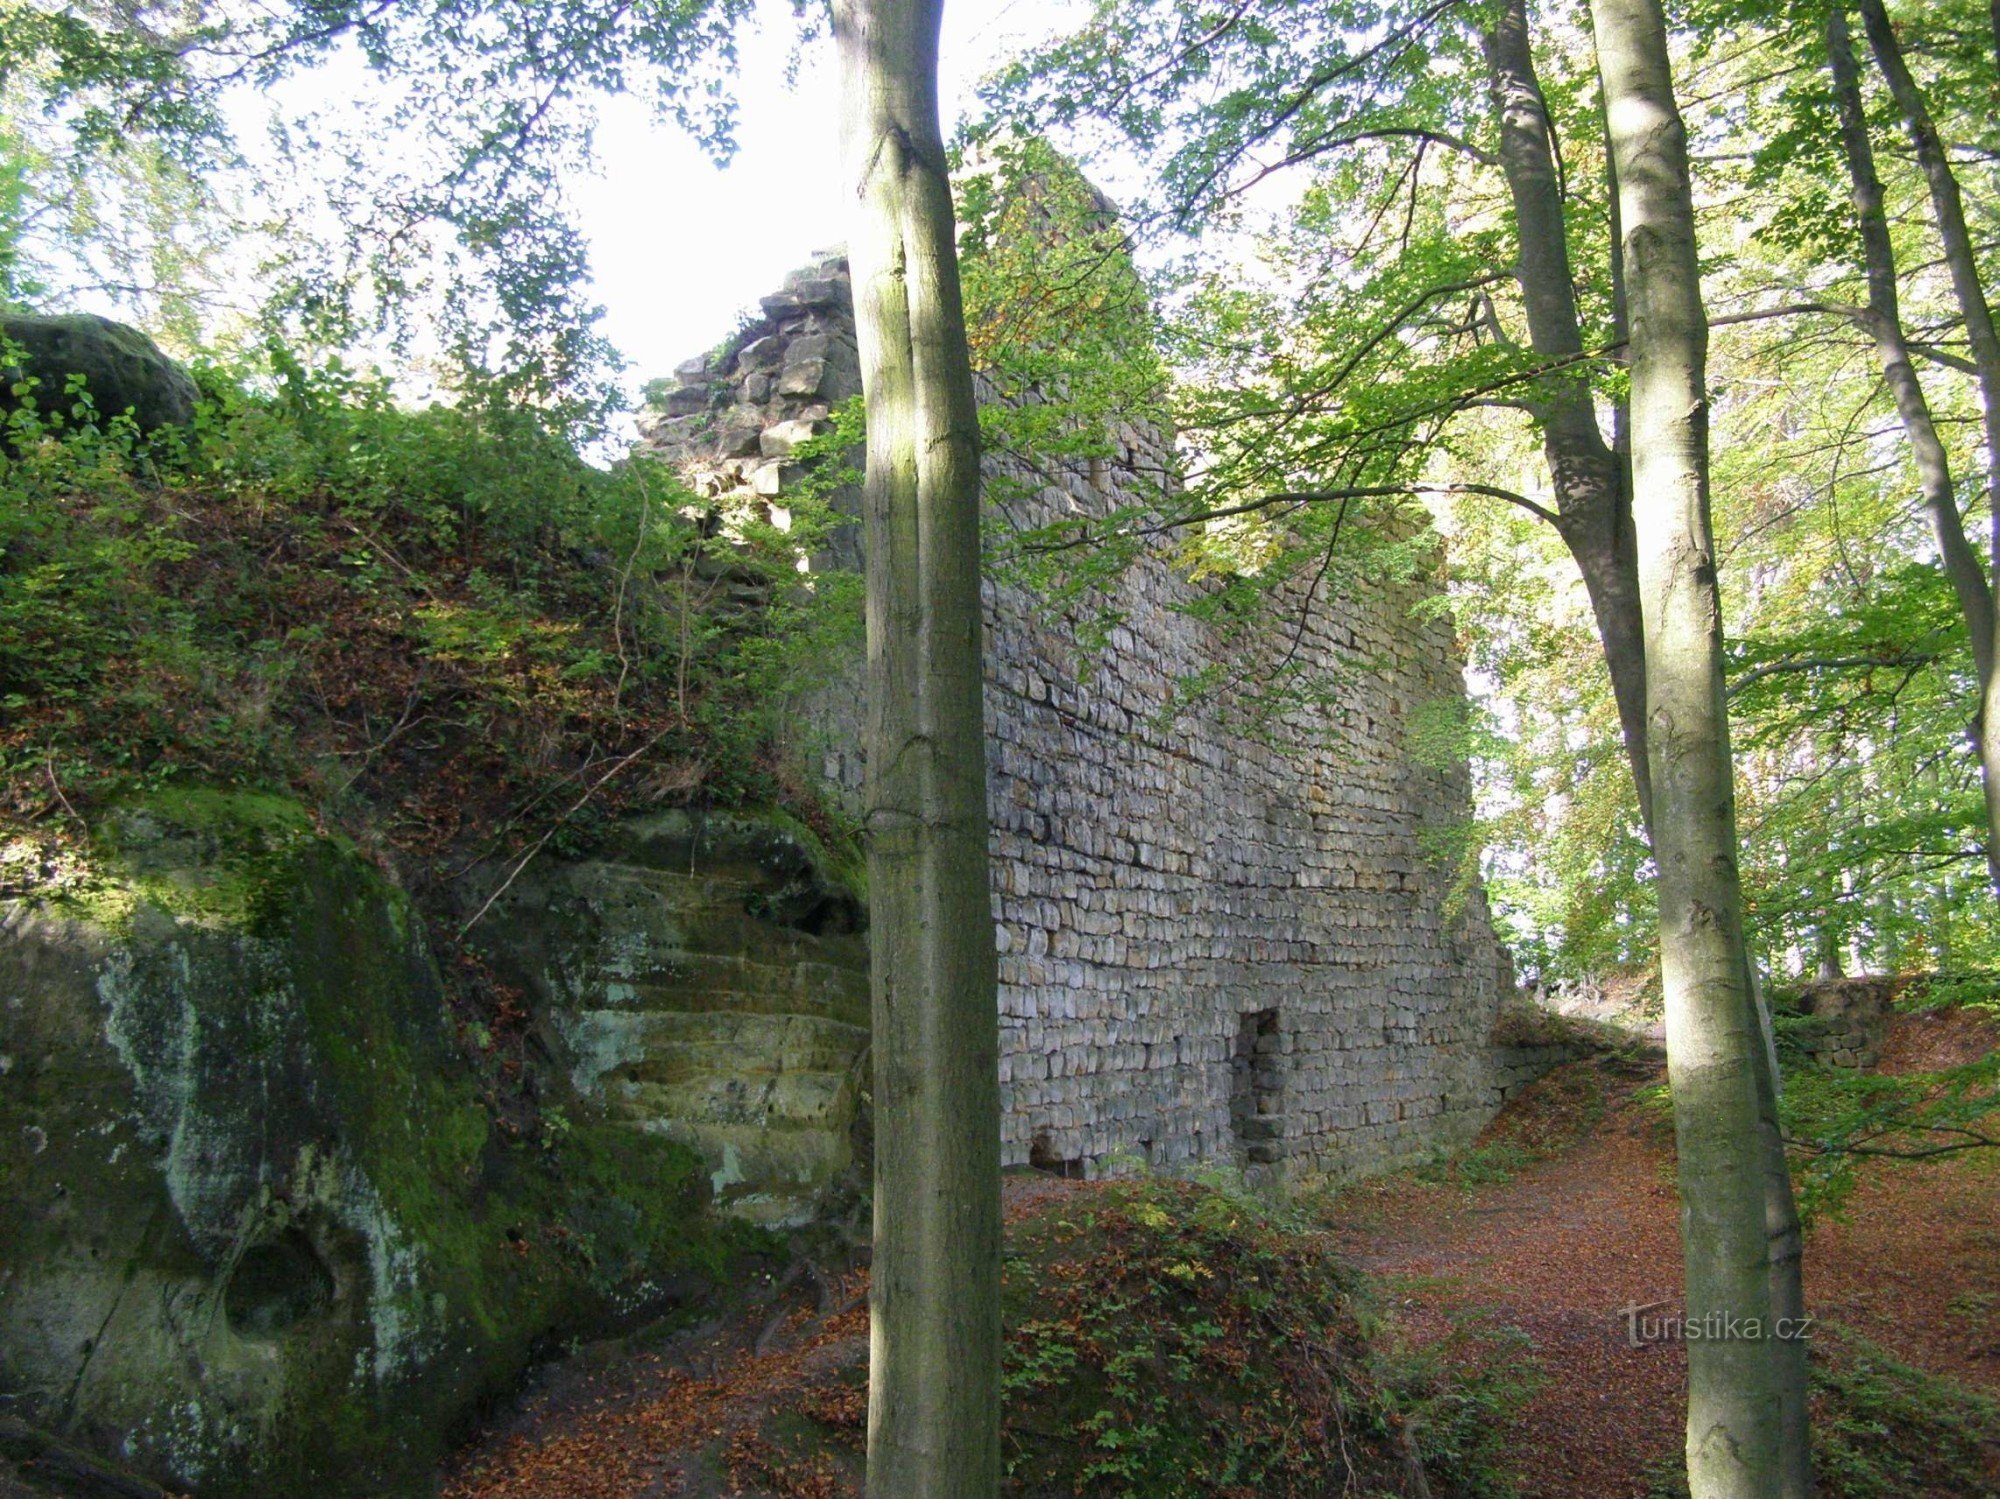 north wall of the castle